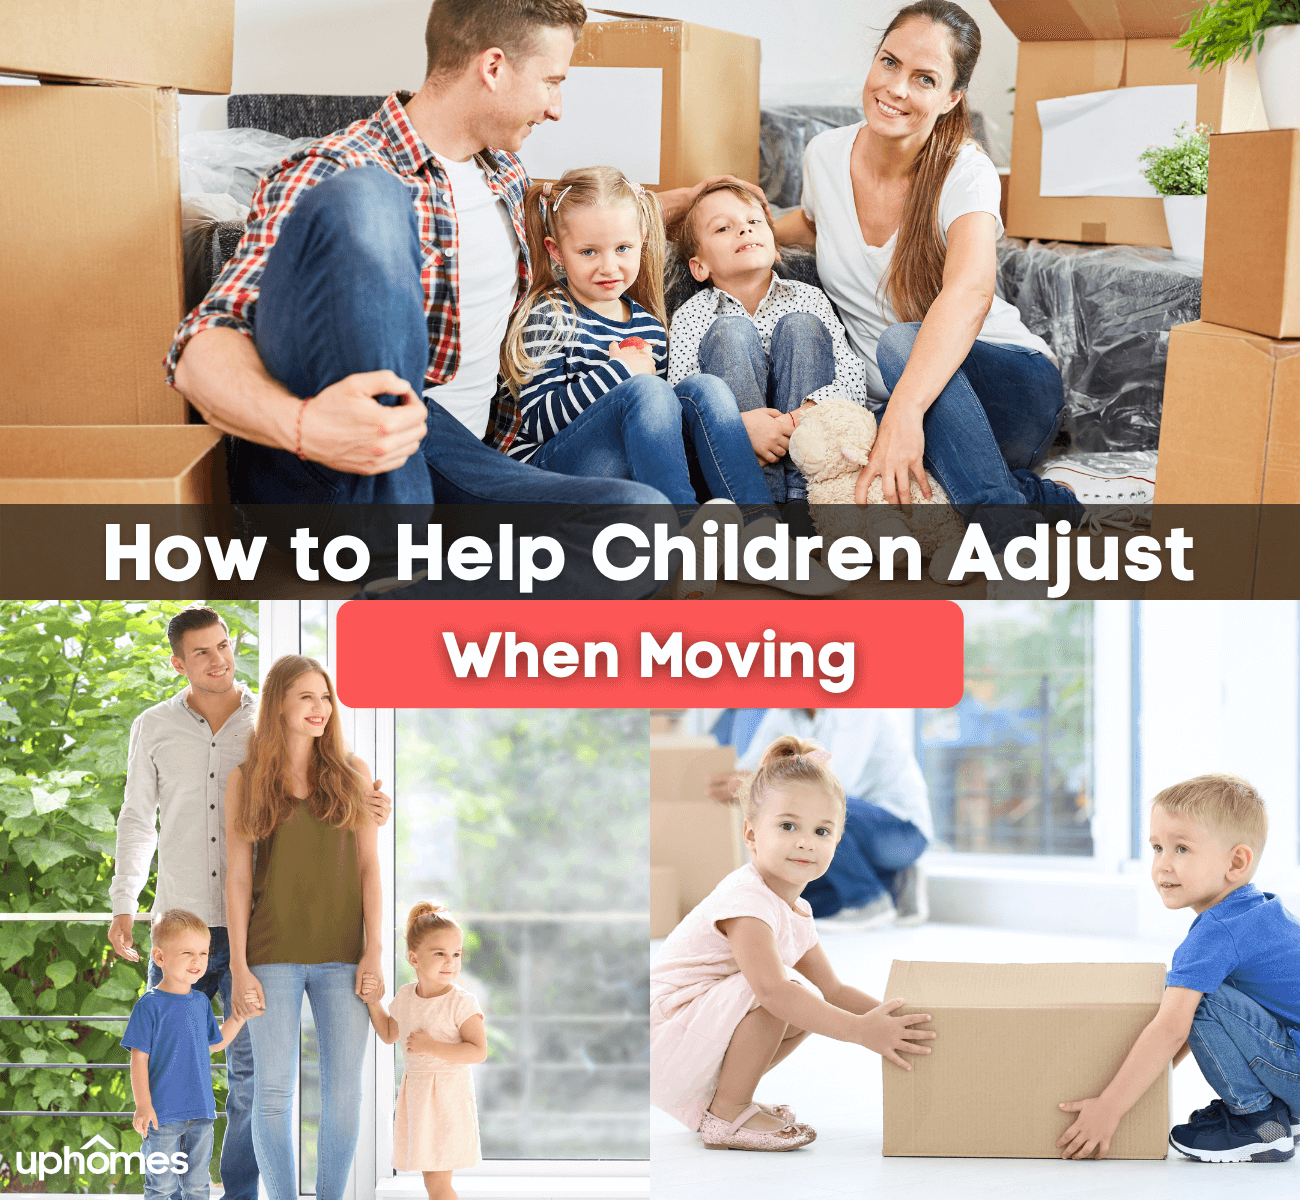 How to Help Children Adjust When Moving to a New Home